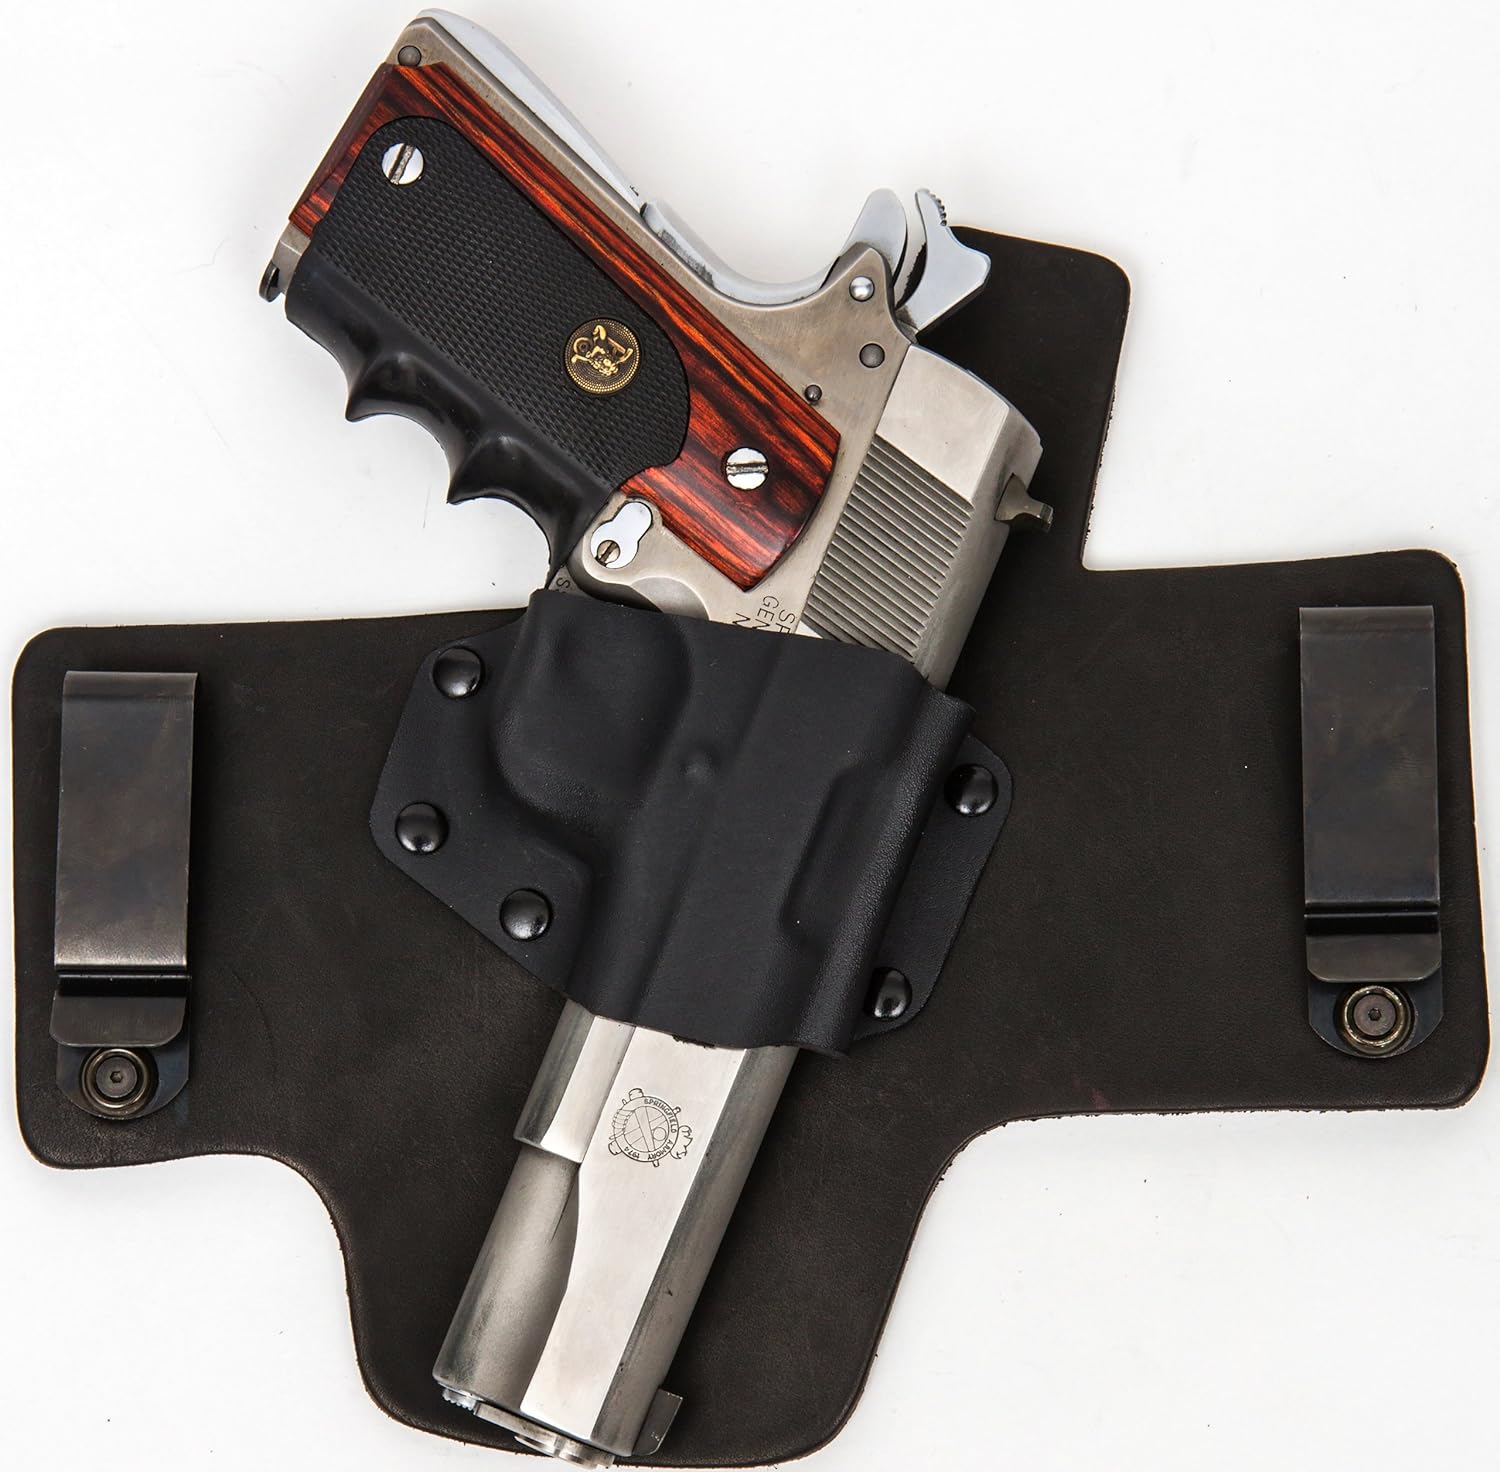 Read more about the article Unveiling Comfort and Security: CrossBreed Super Tuck IWB Holster Review